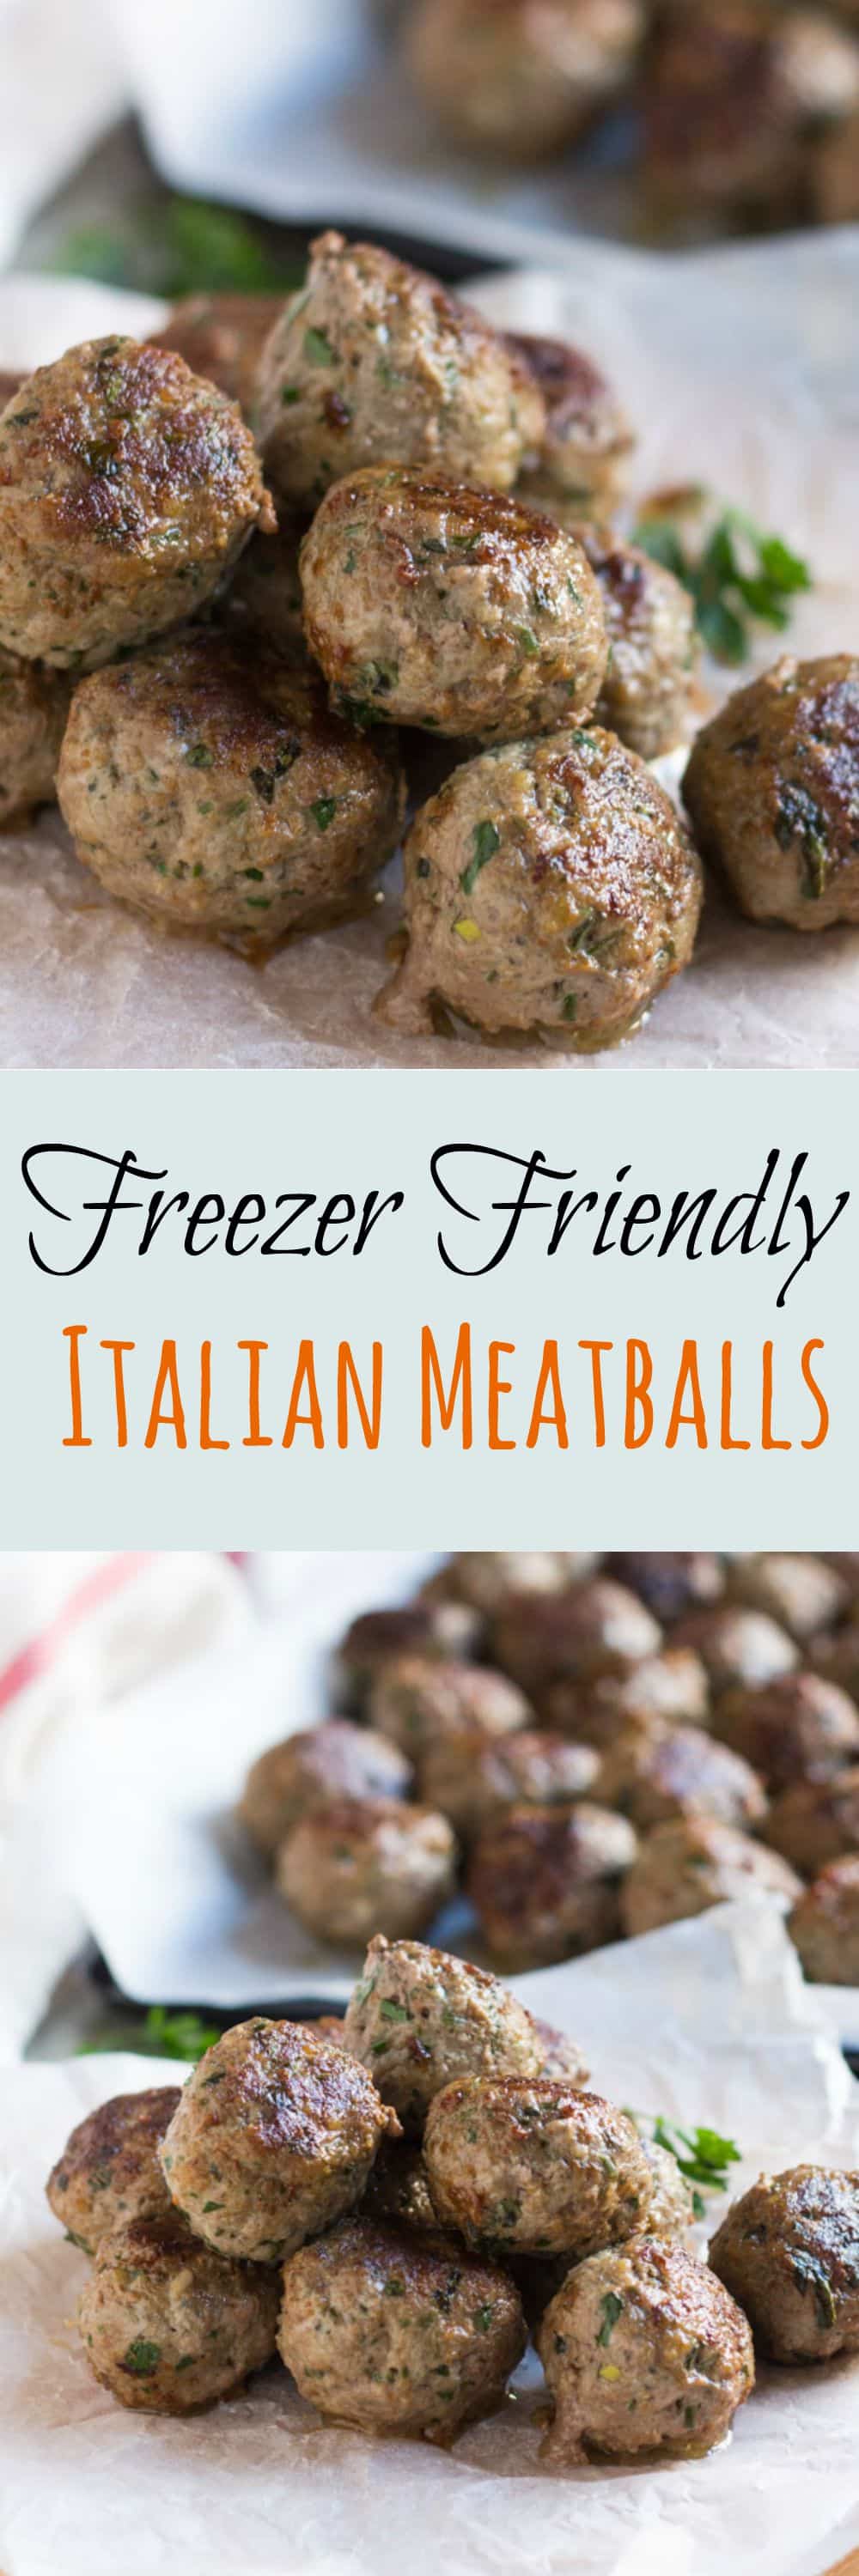 Freezer Friendly Italian Meatballs.  Handy to have in the freezer for a quick meal. Just simmer in tomato sauce whilst the pasta is cooking.